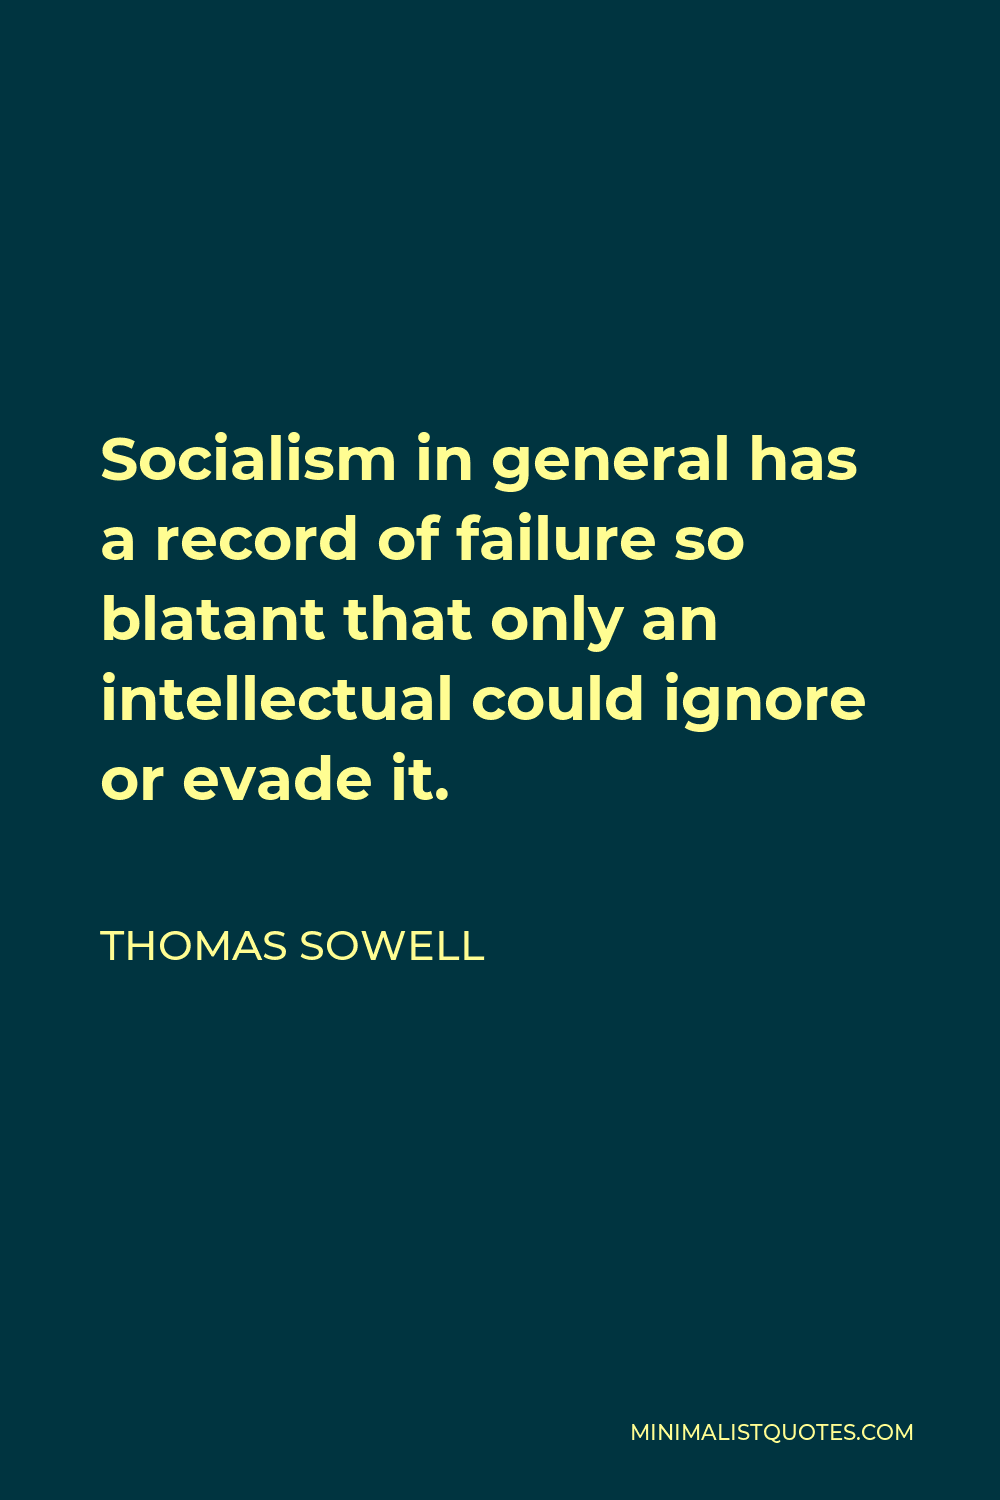 Thomas Sowell Quote - Socialism in general has a record of failure so blatant that only an intellectual could ignore or evade it.